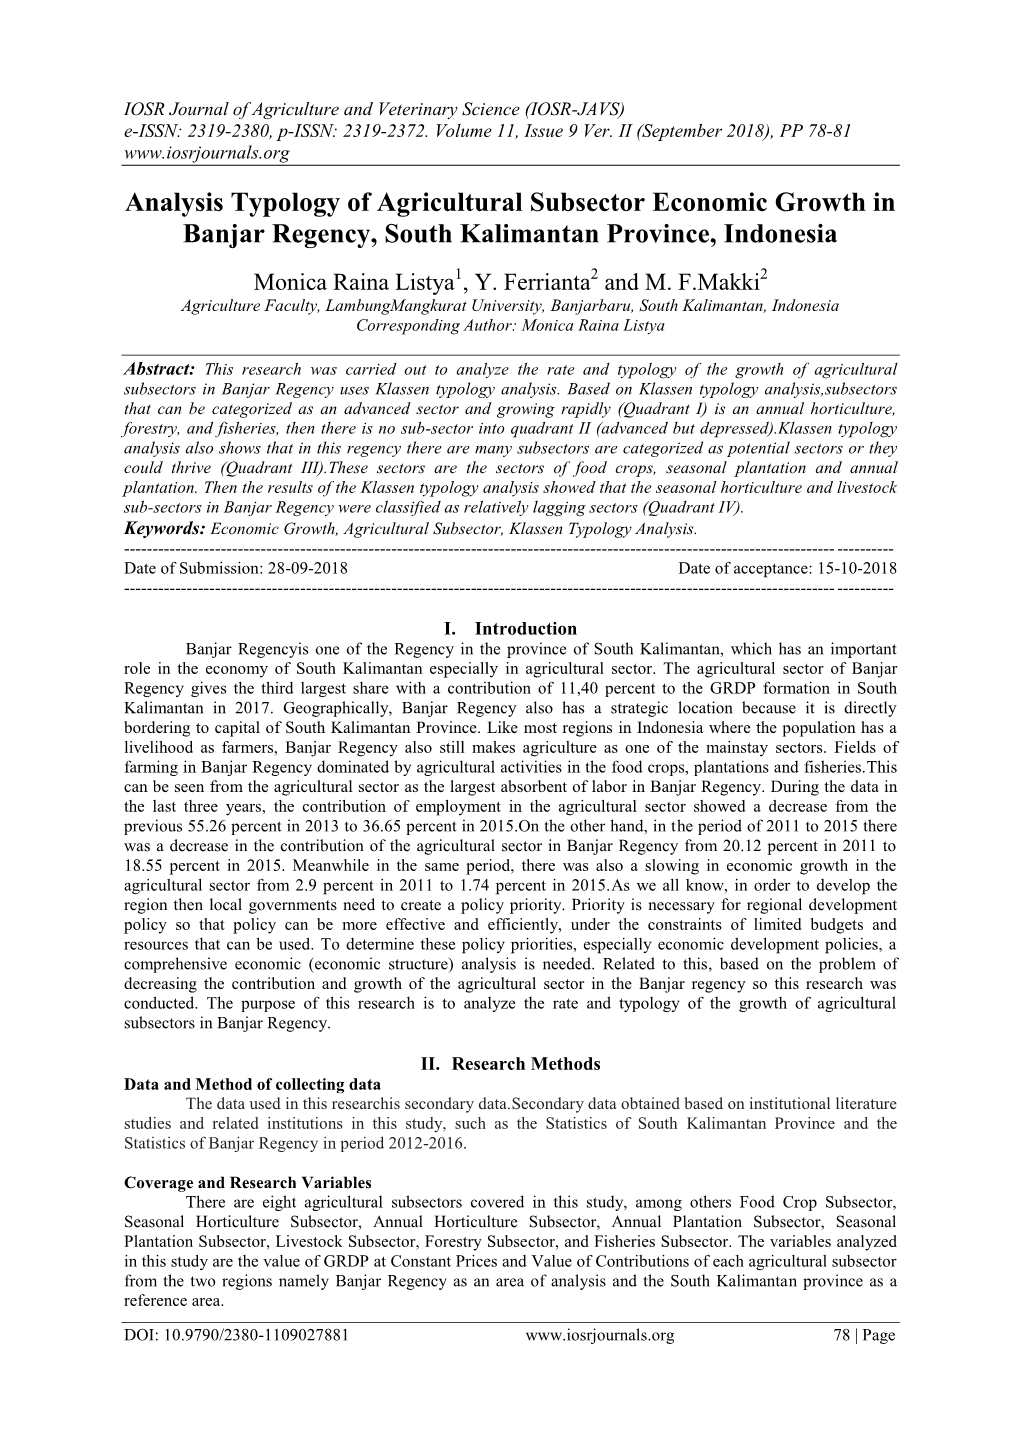 Analysis Typology of Agricultural Subsector Economic Growth in Banjar Regency, South Kalimantan Province, Indonesia